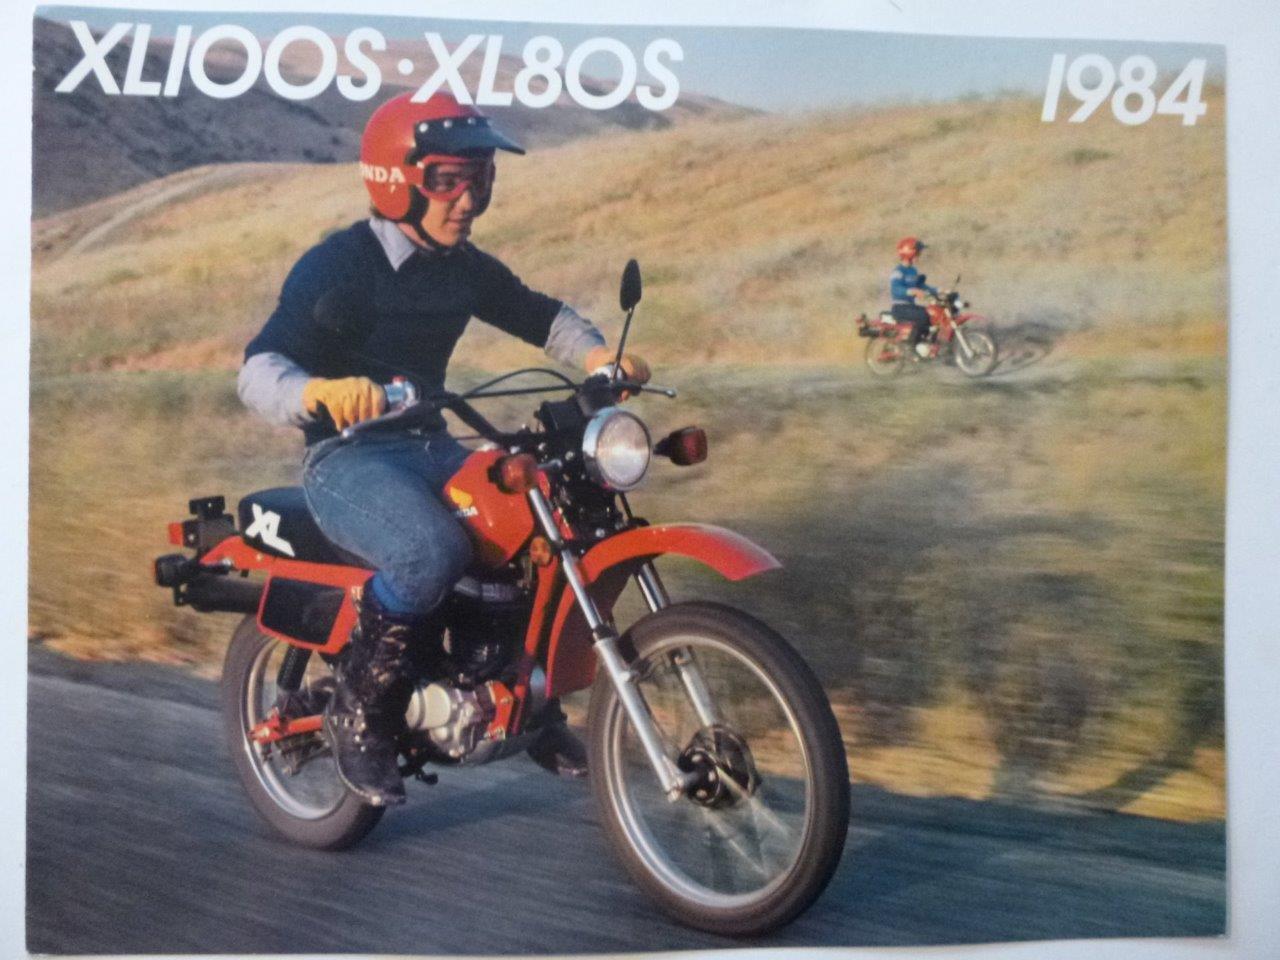 HONDA motorcycle brochure XL 100S & XL 80S Uncirculated high quality color 84 #2